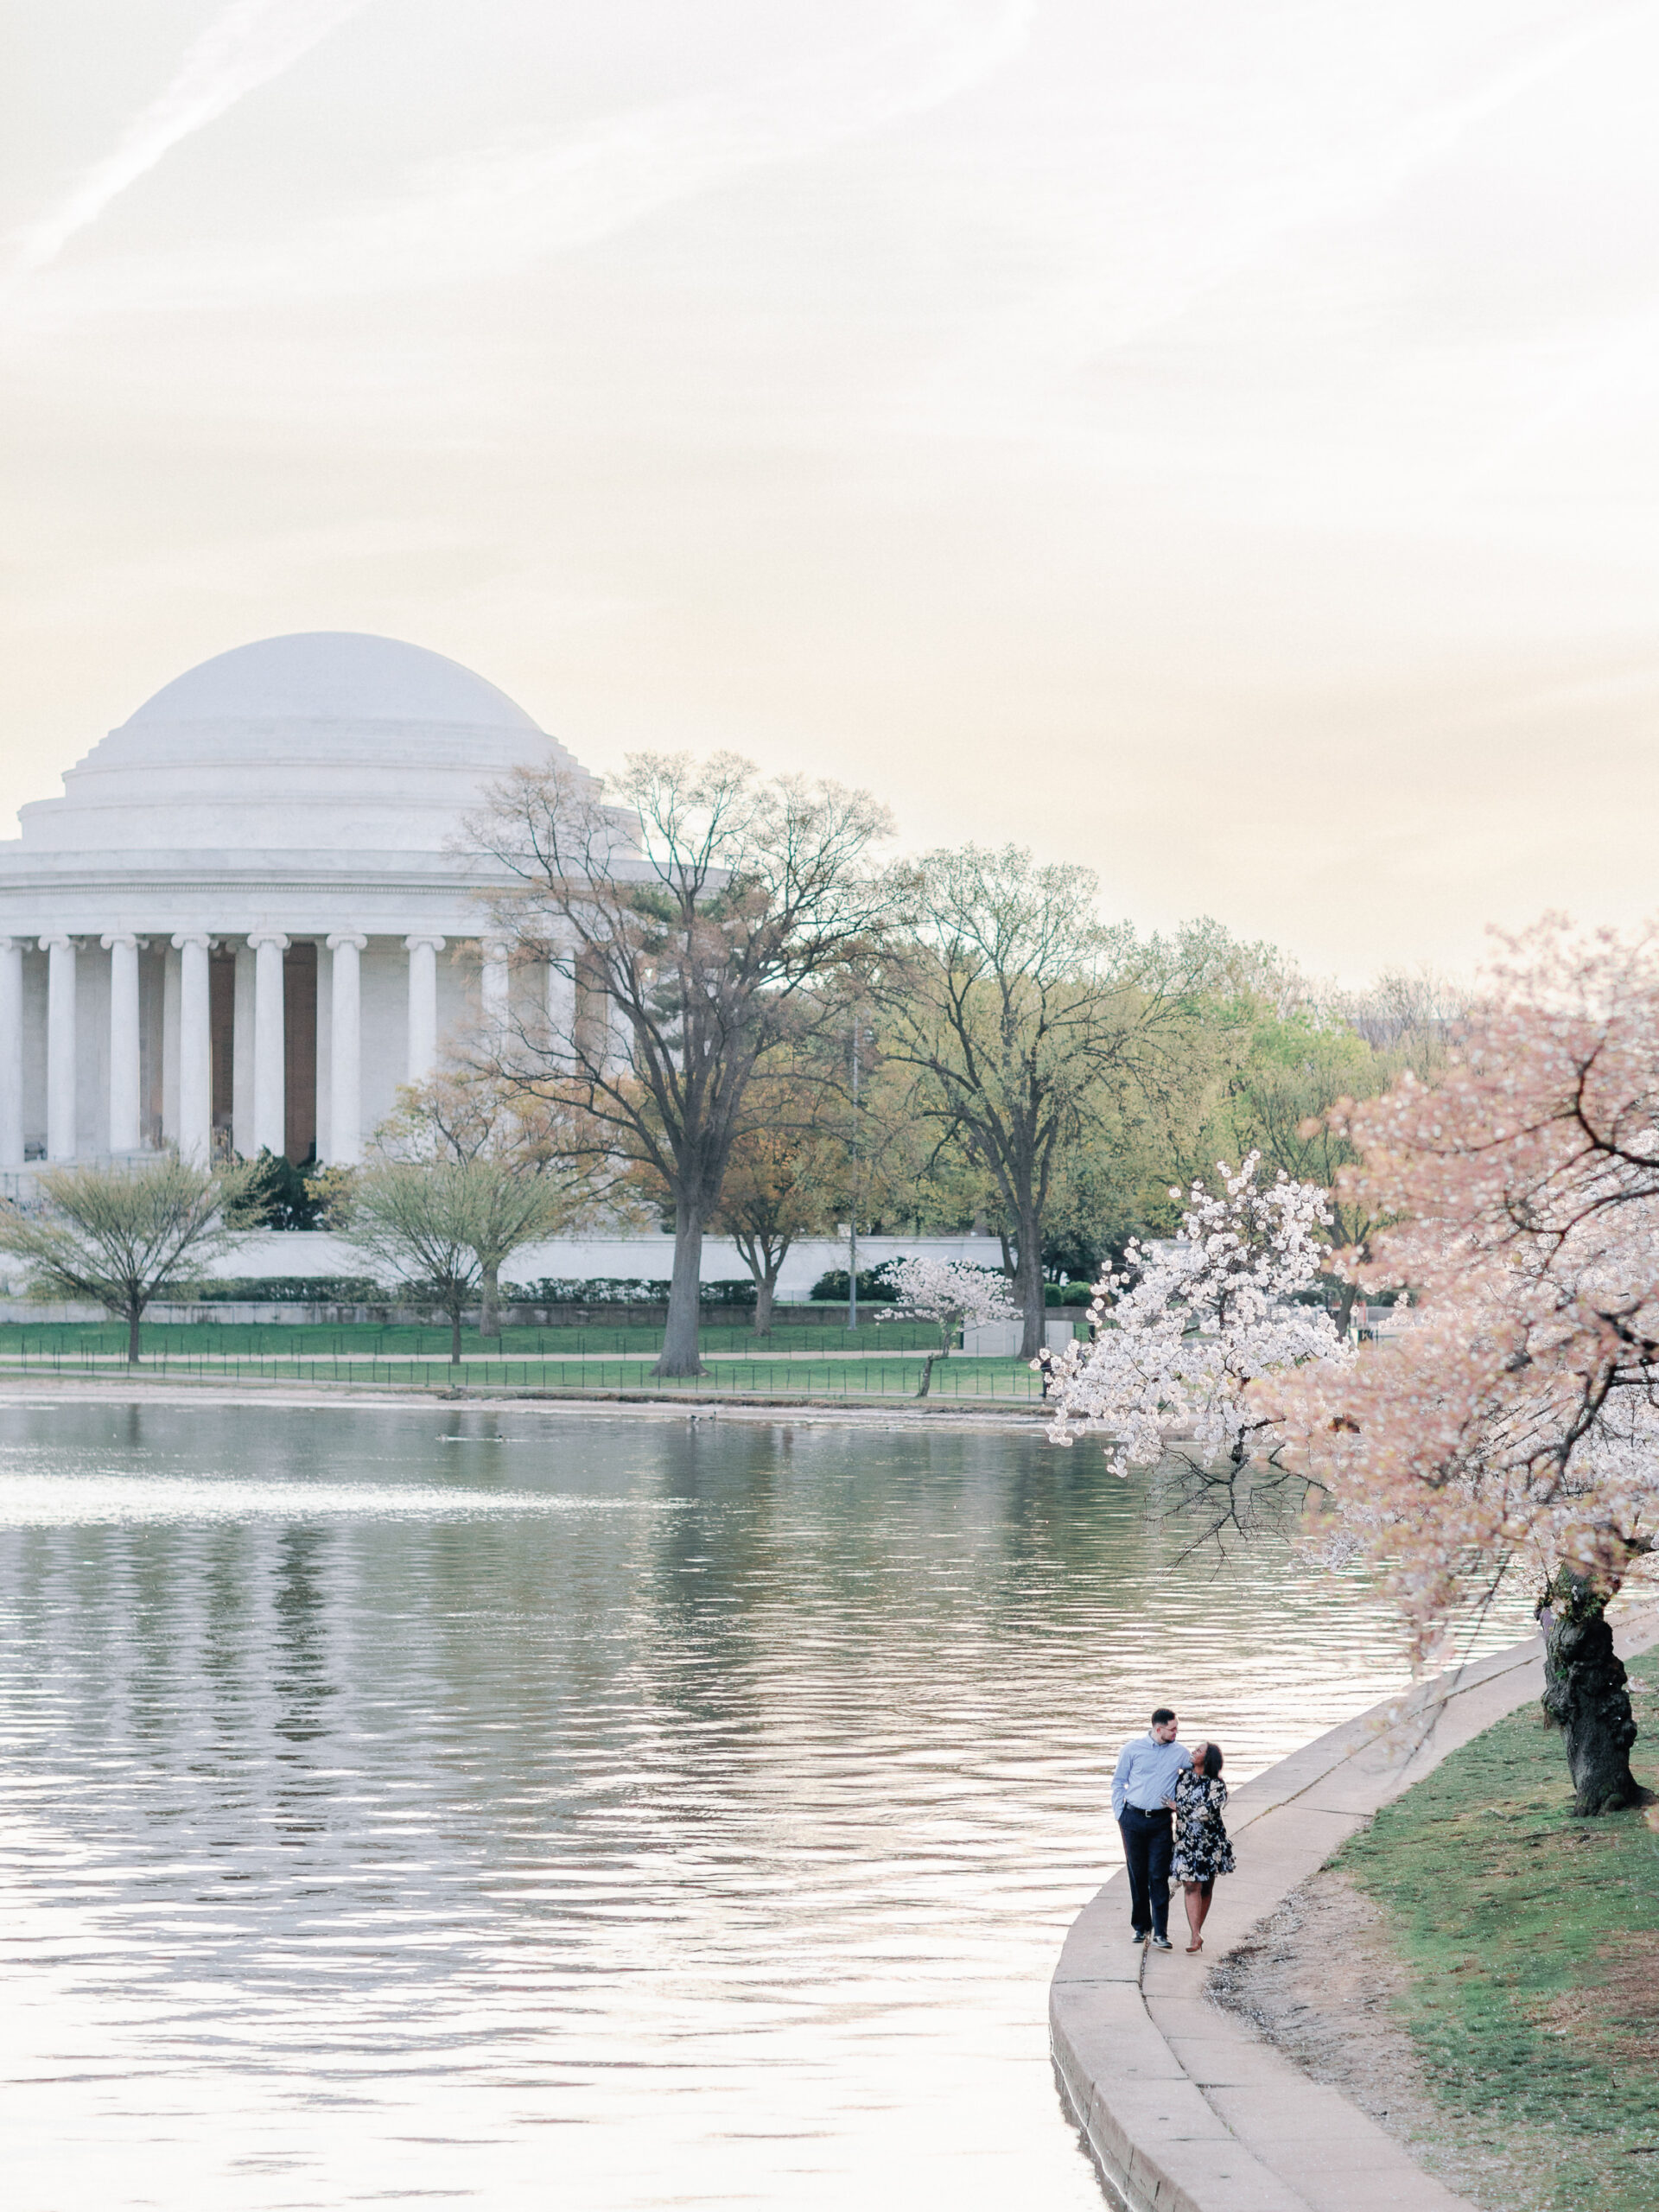 A newly engaged couple walking along the edge of the Tidal Basin during the cherry blossom bloom.